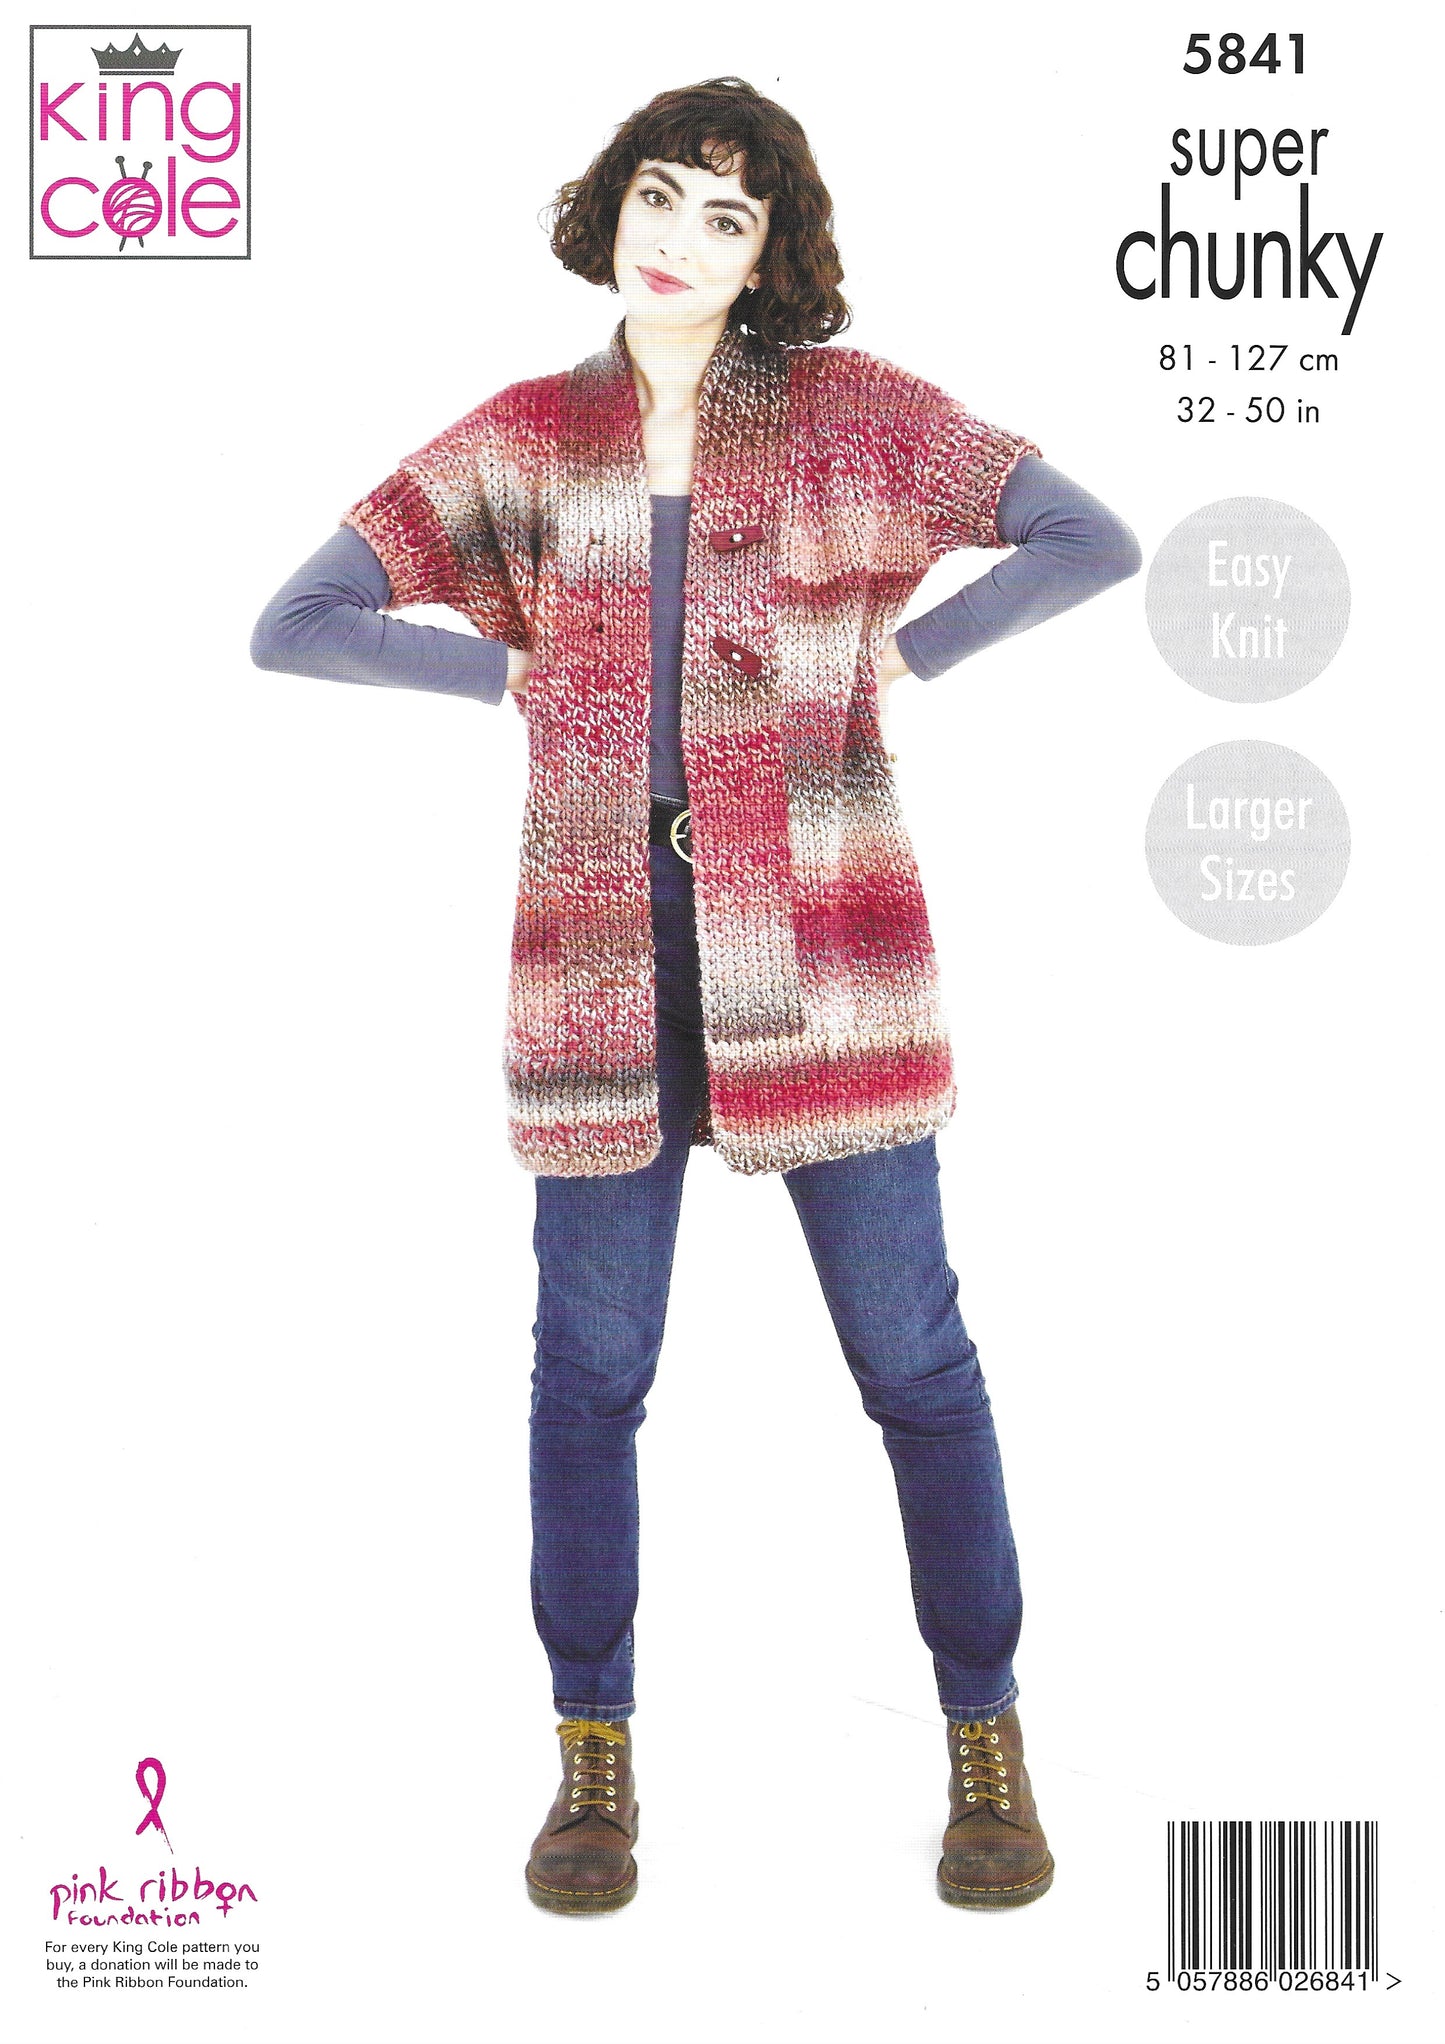 King Cole 5841 Jacket and Waistcoat Easy Knit Larger Sizes Super Chunky Knitting Pattern